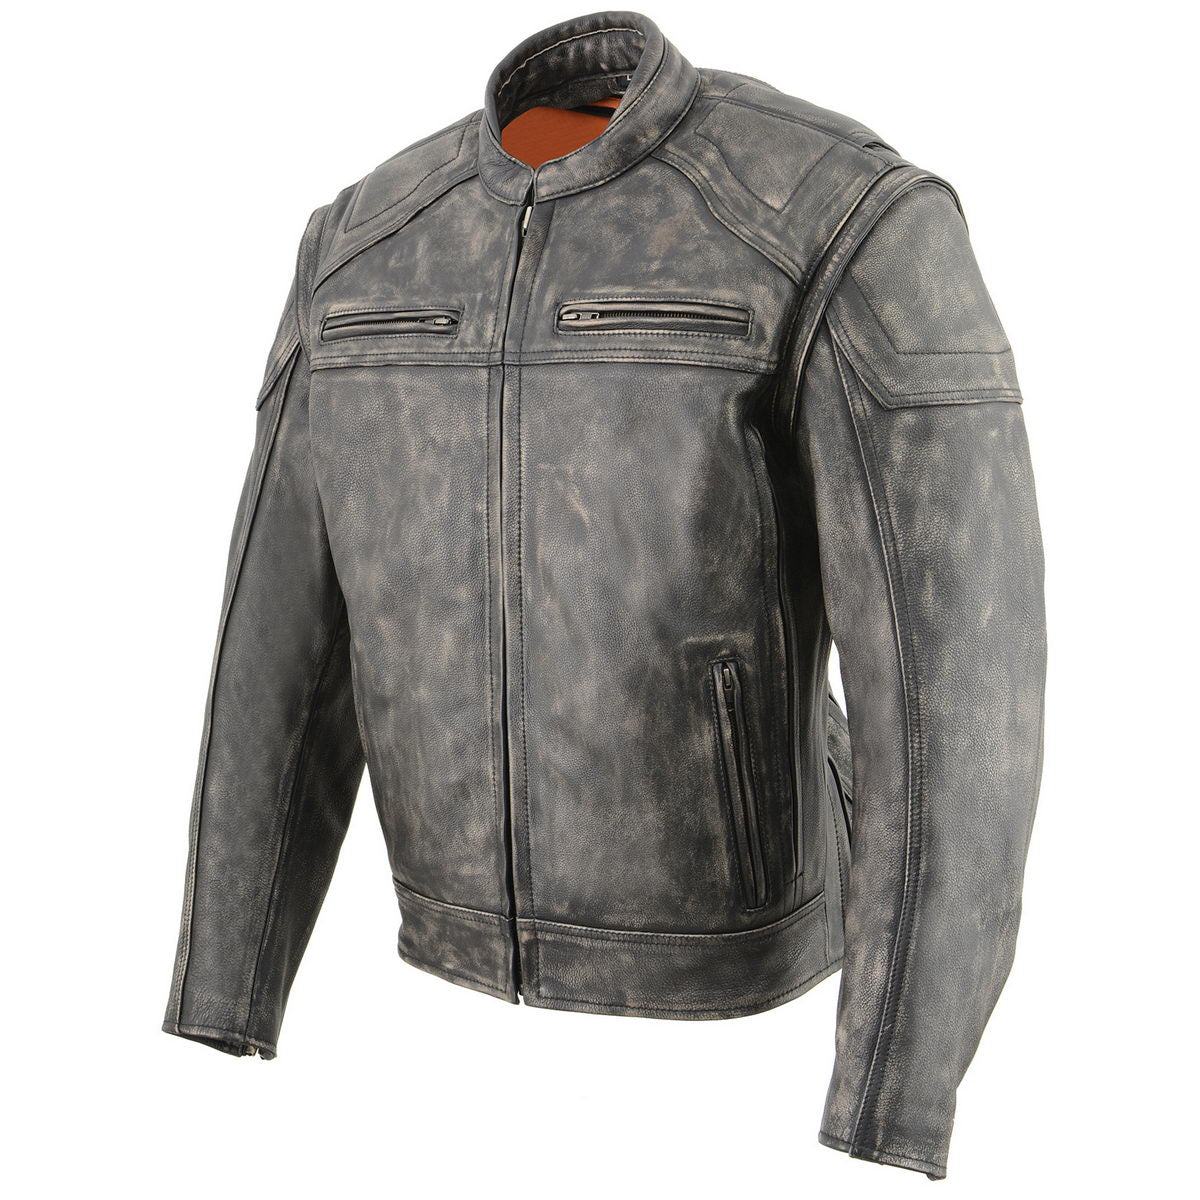 Milwaukee Leather MLM1509 Men's Distressed Brown ‘2 in 1’ Leather Jacket with Zip-Off Sleeves